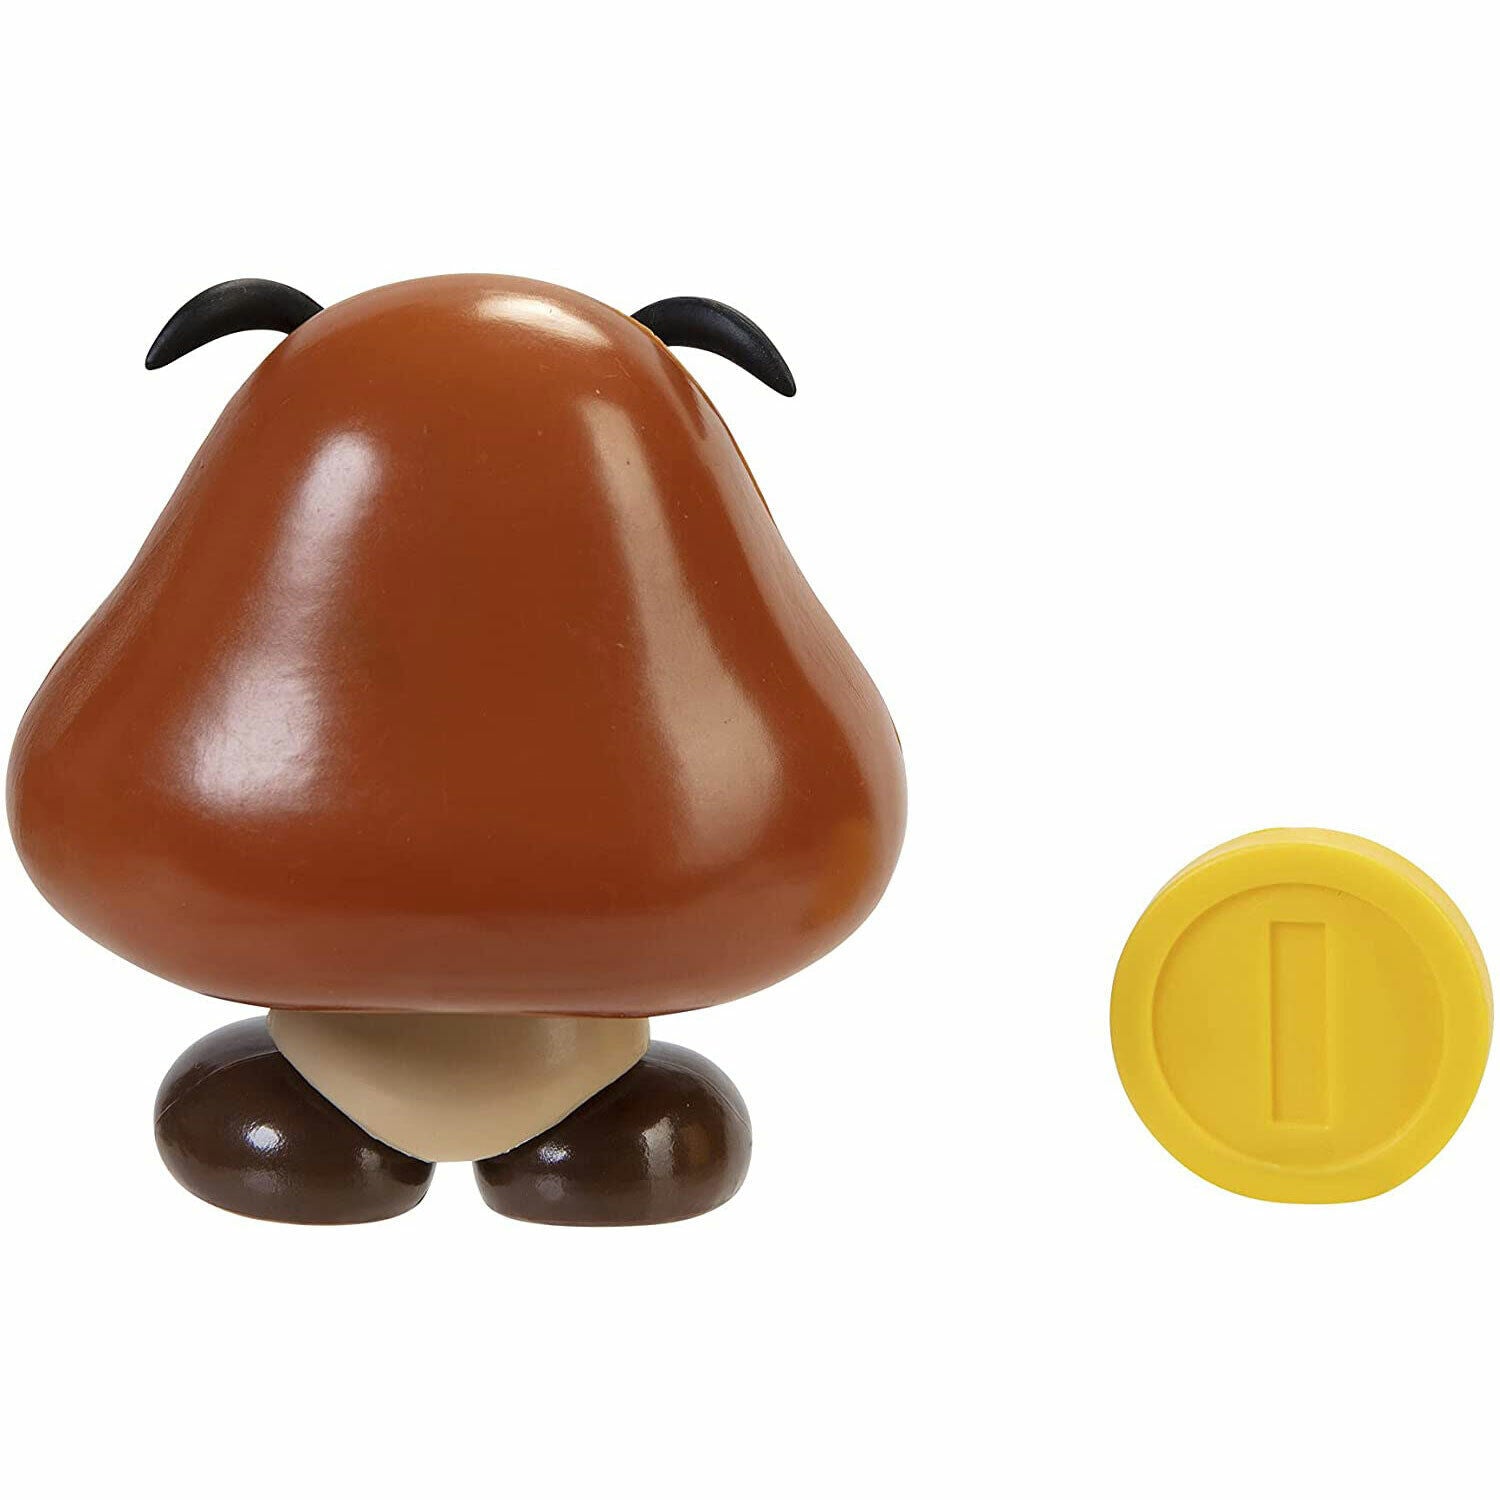 Super Mario 4 Inch Scale Figure Wave 24 - Goomba with Coin